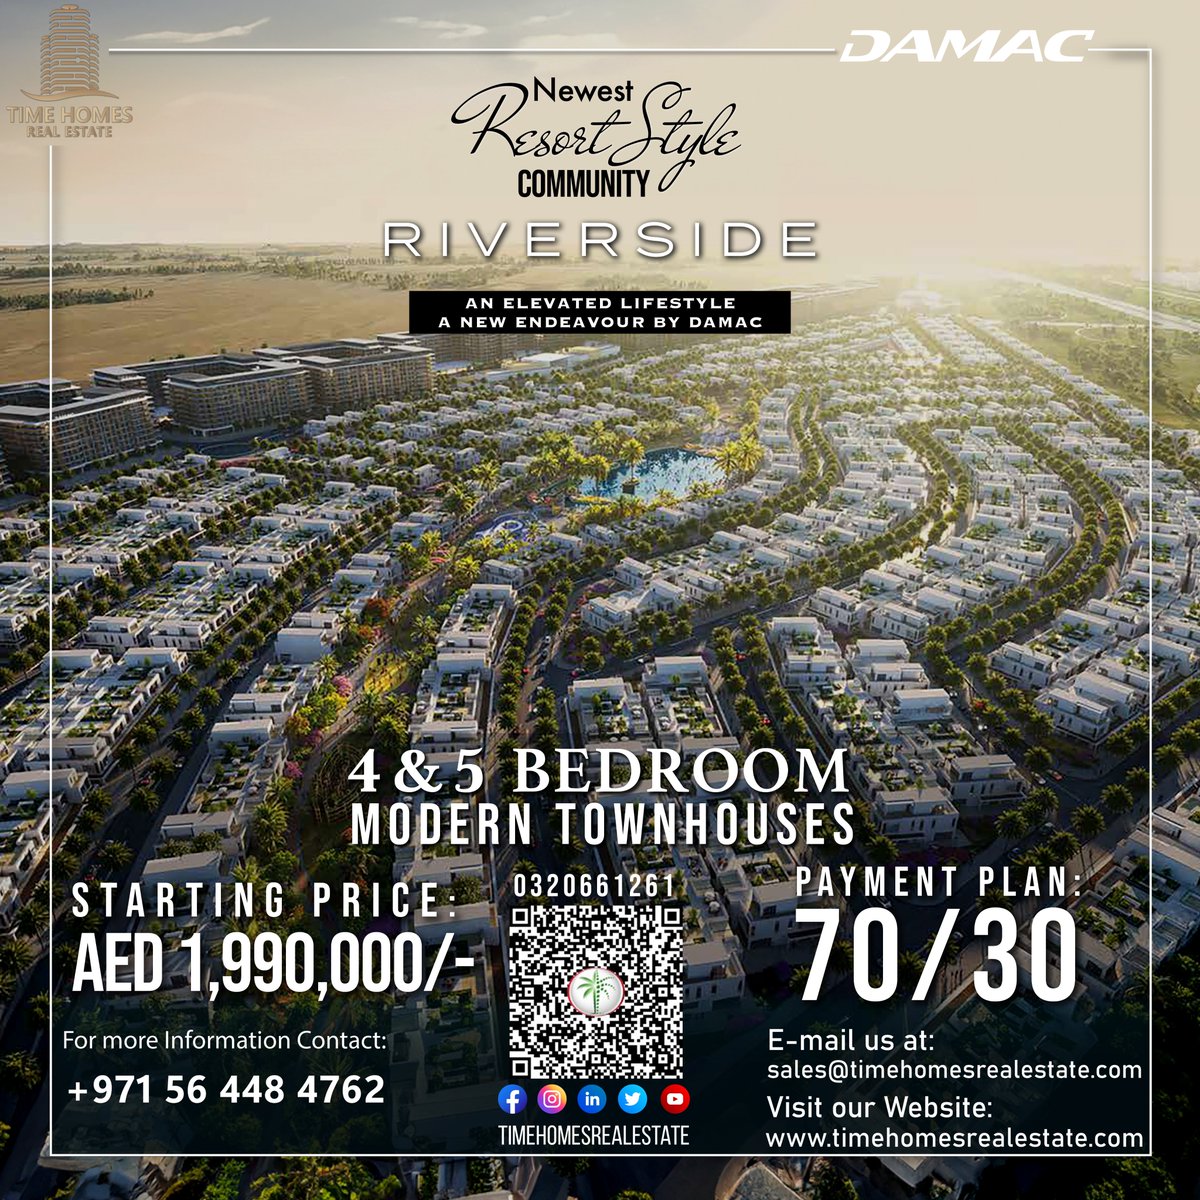 luxury living at its finest with the Newest Resort Style Community RIVER SIDE by DAMAC.

Phone No: +97156 448 4762

#LuxuryLiving #newcommunity #DAMACRiverside #riverside #luxury #dubai #dubailuxury #damac #damacproperties #DamacDeveloper #TimeHomes #timehomesrealestate